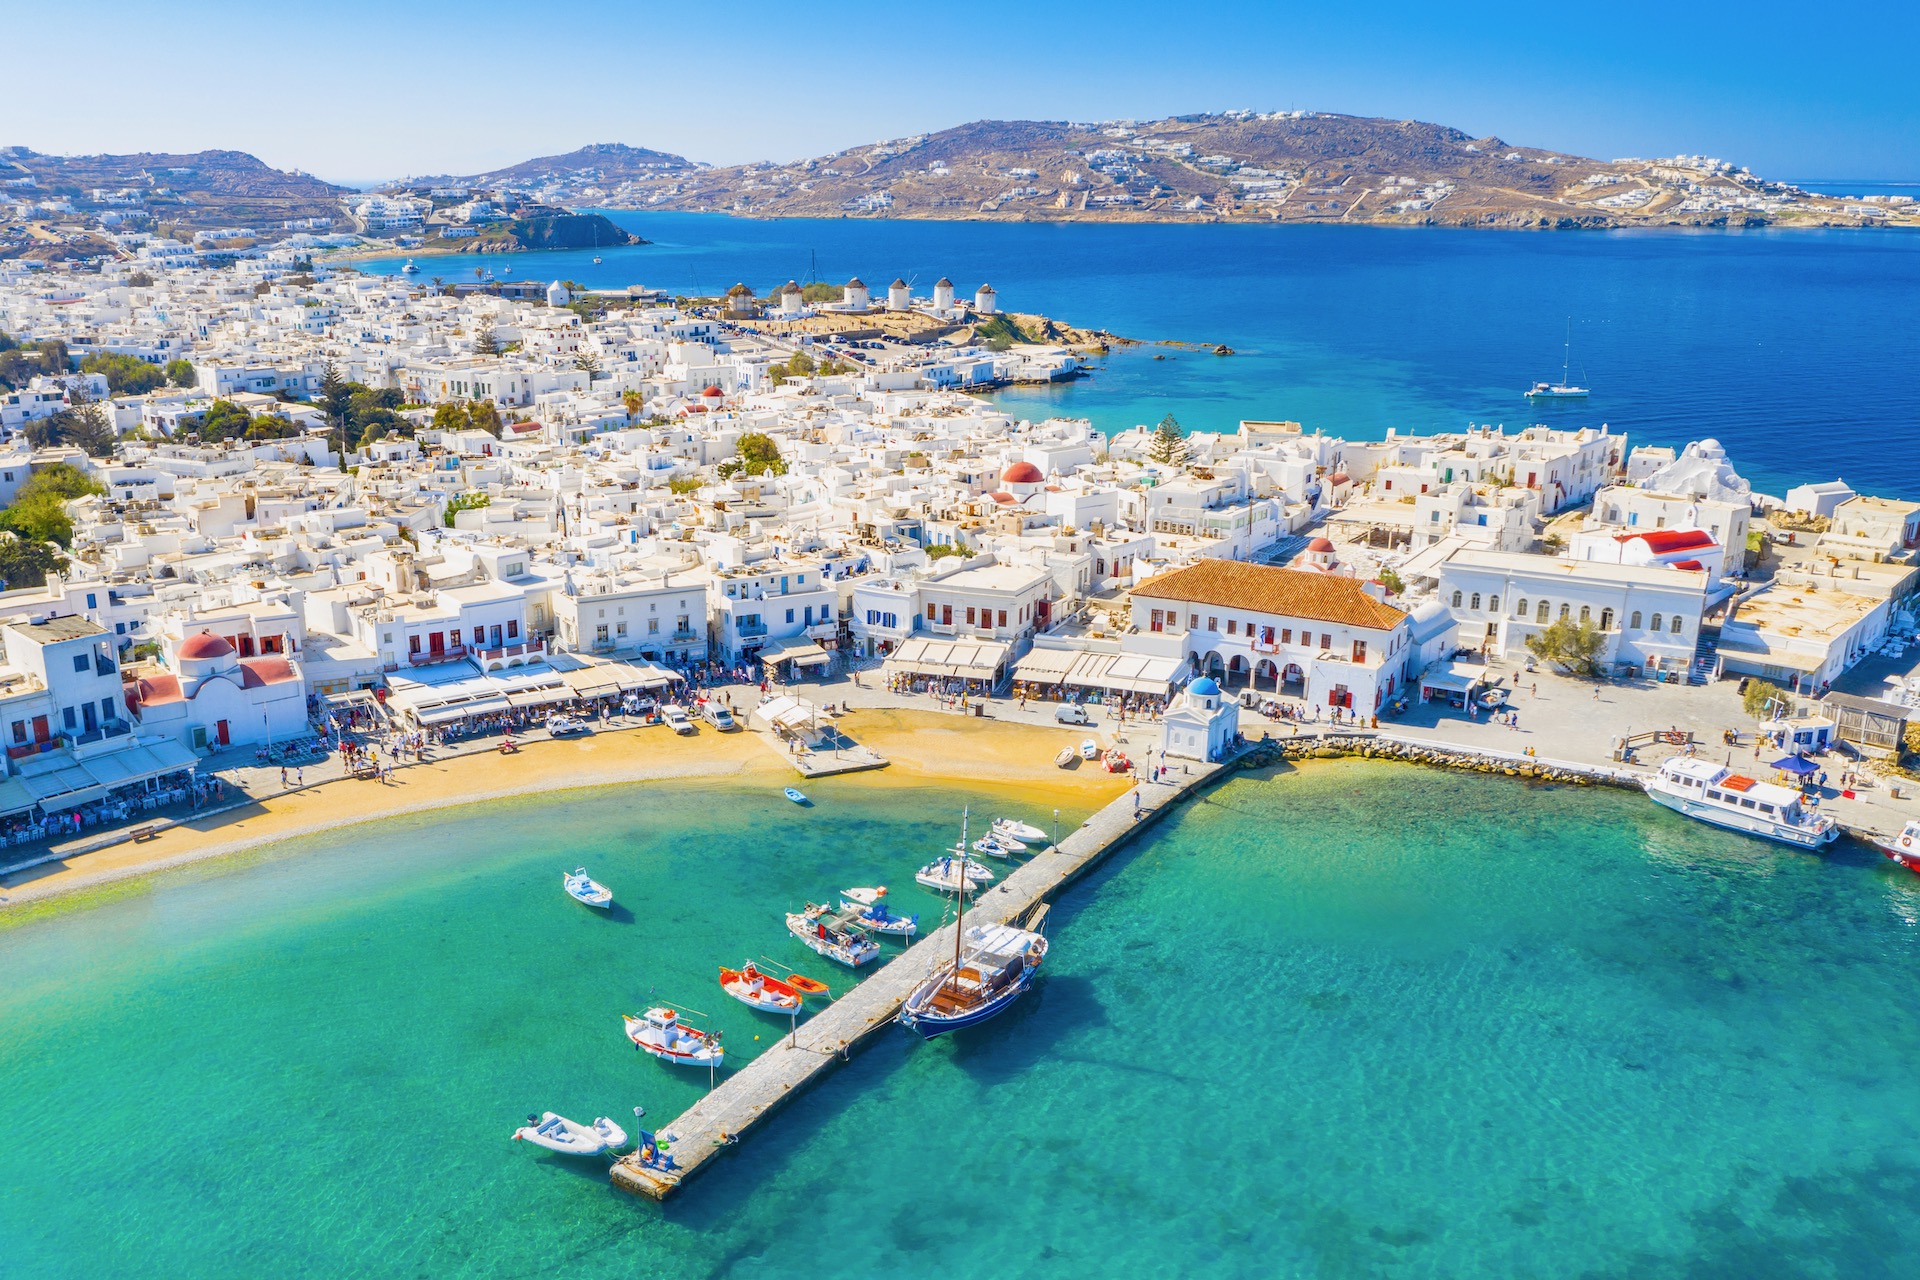 View of the old port in Mykonos town from the air 